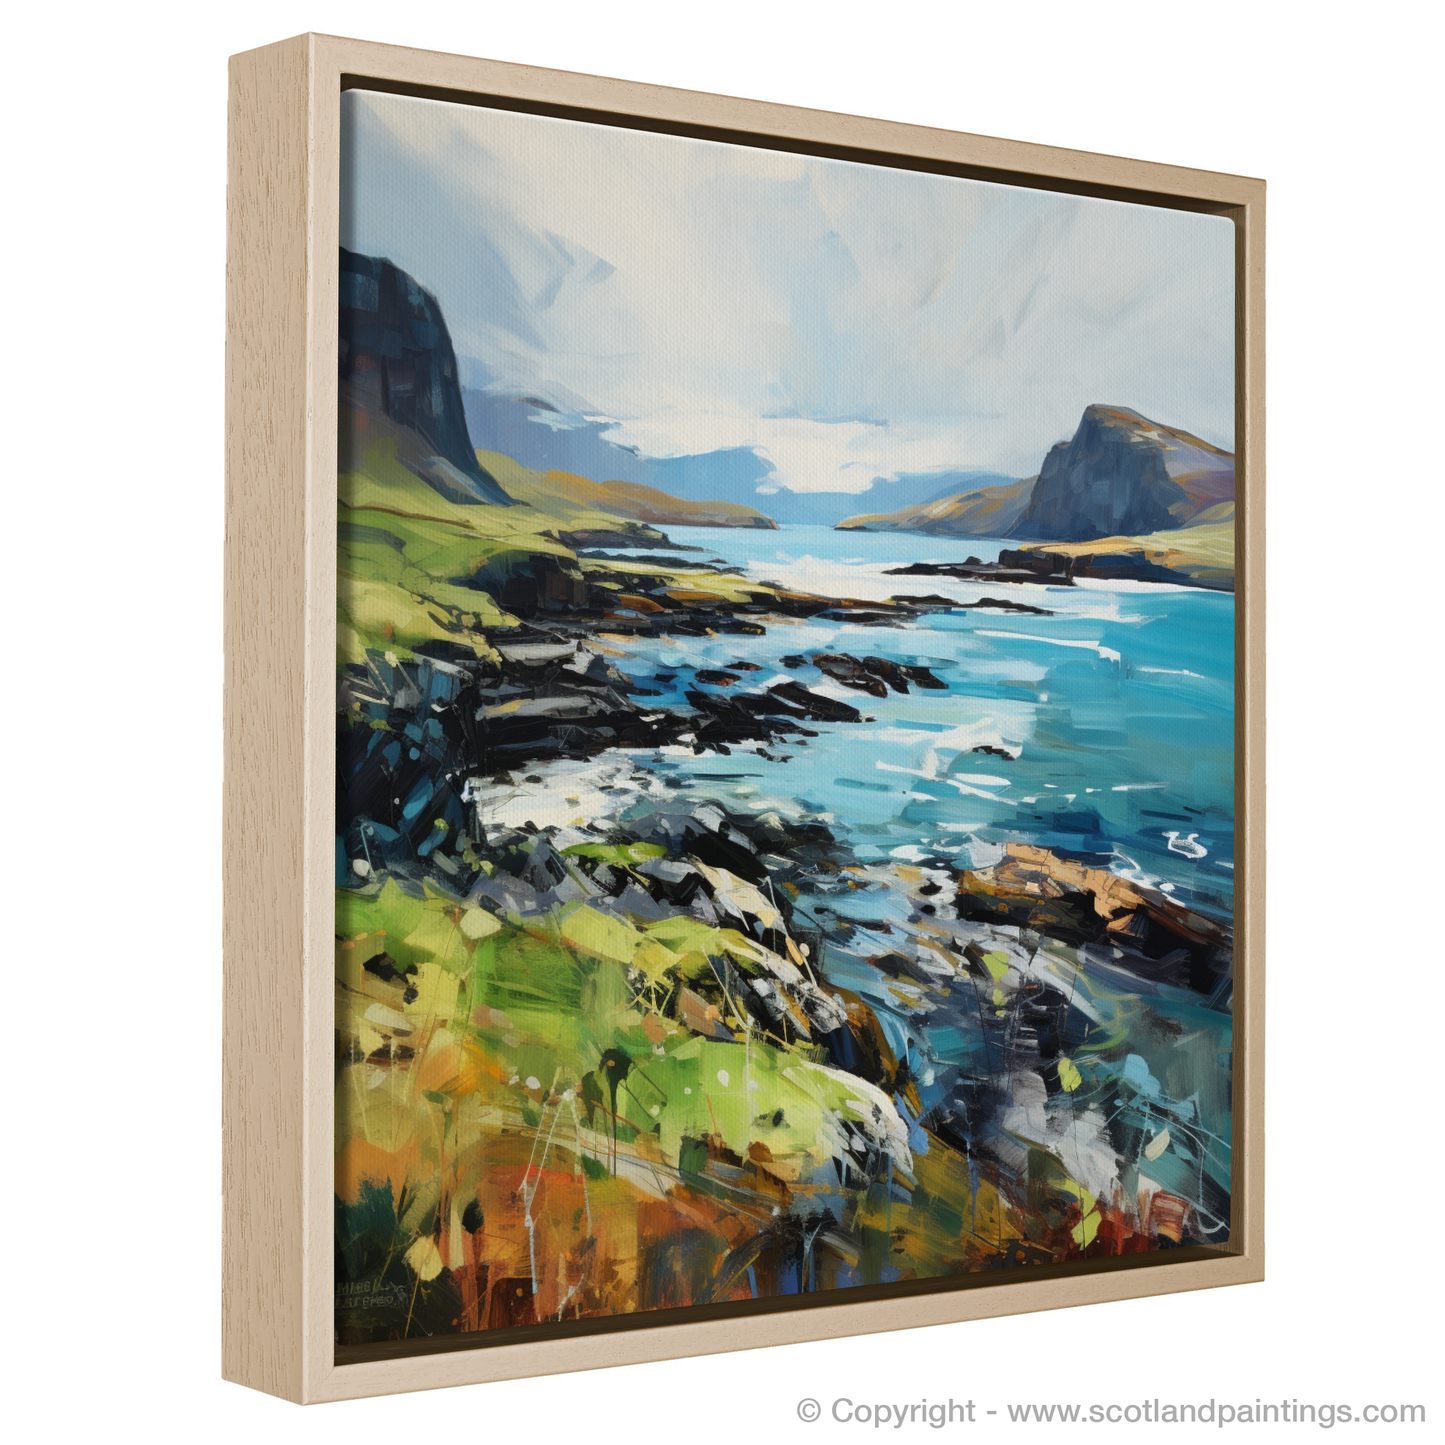 Painting and Art Print of Ardtun Bay, Isle of Mull entitled "Ardtun Bay Expressed: The Wild Charm of Scotland's Coastal Majesty".